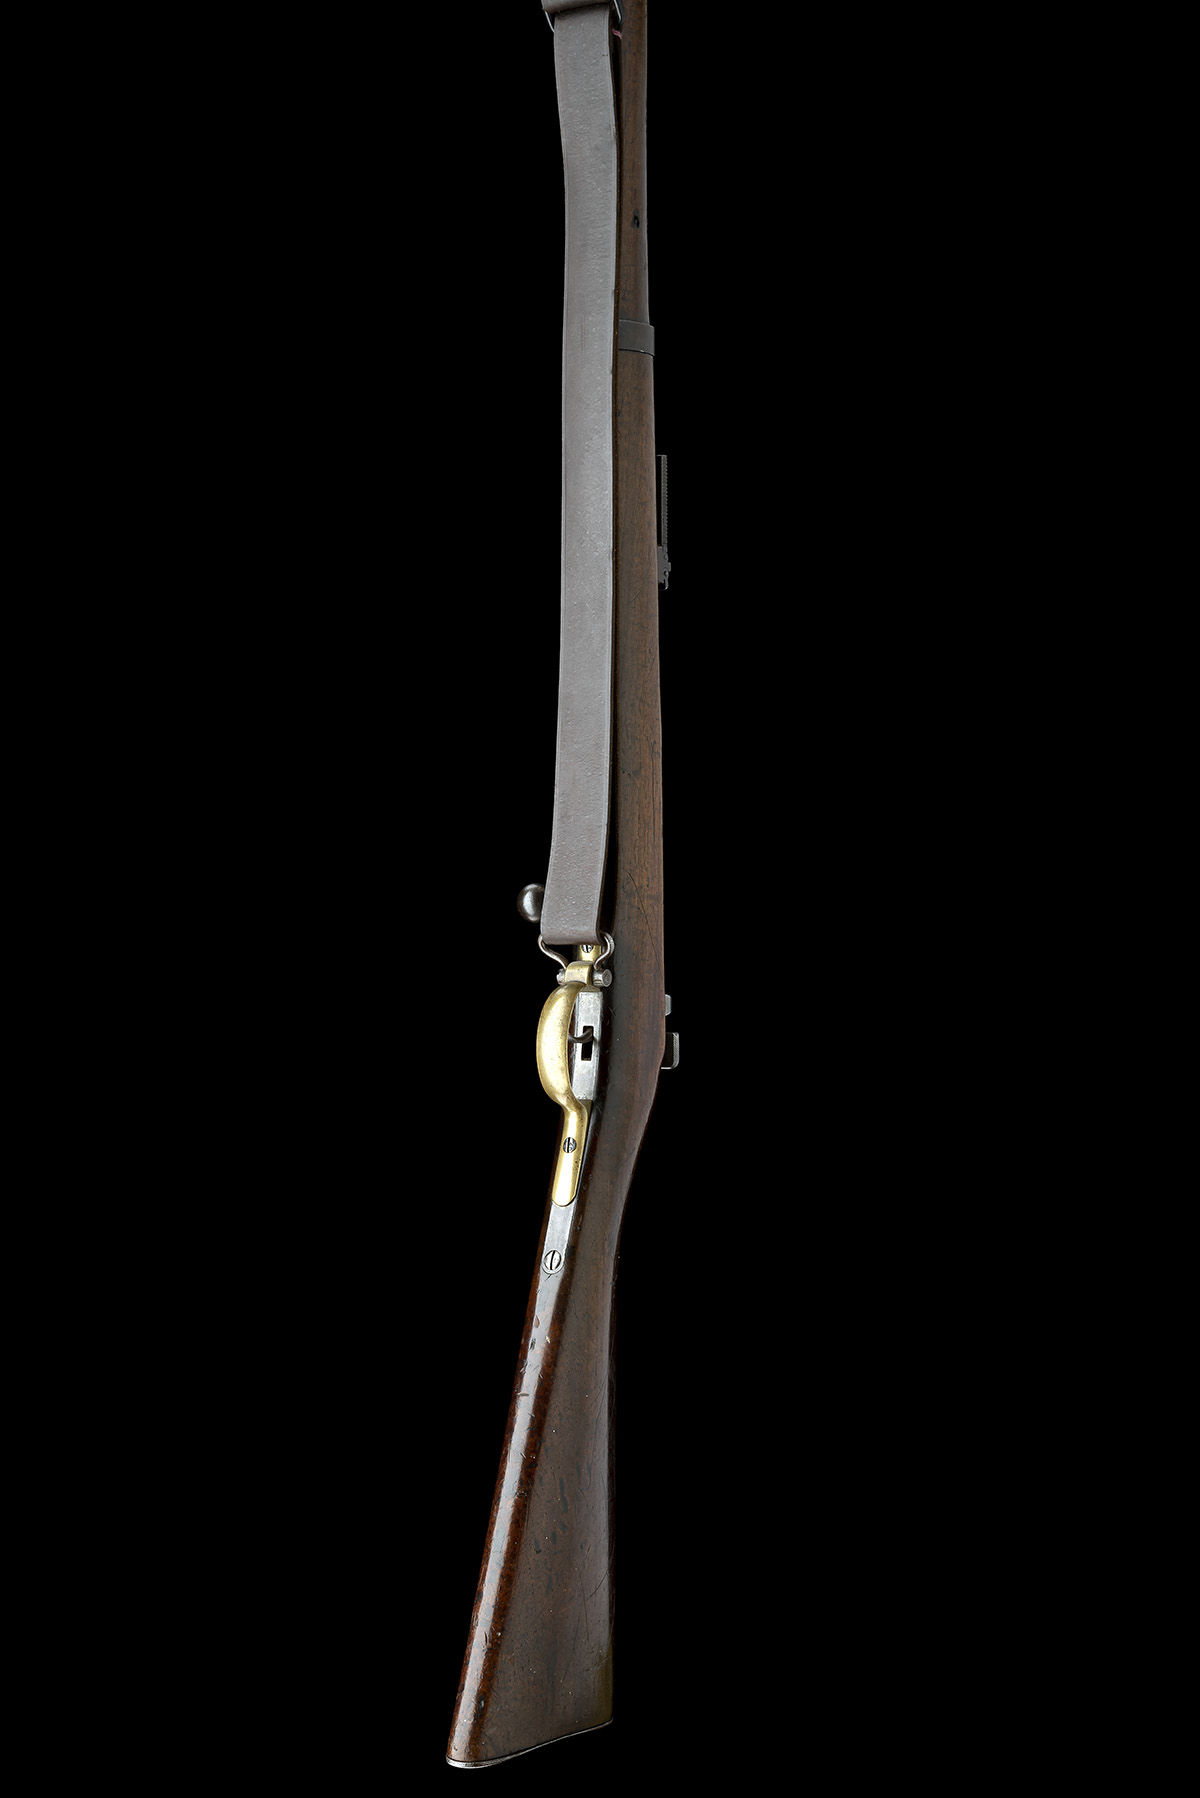 A GERMAN .43 (11.15 X 60mm) MAUSER MODEL 1871 BOLT ACTION SINGLE SHOT INFANTRY RIFLE, MADE AT AMBERG - Image 6 of 9